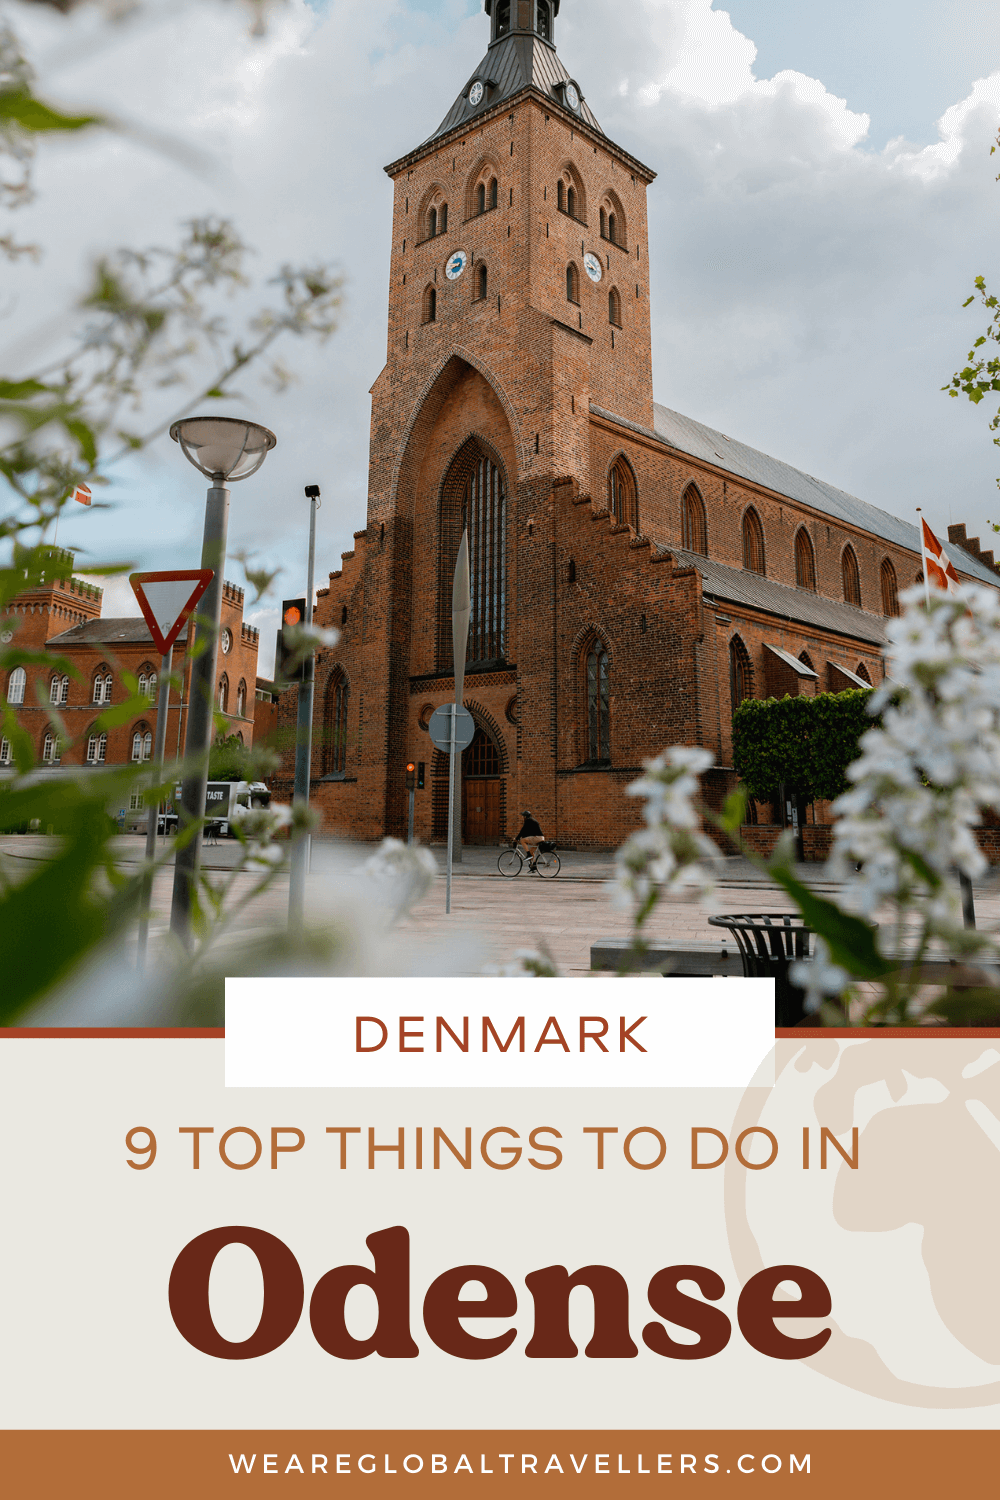 The best things to do in Odense, Denmark